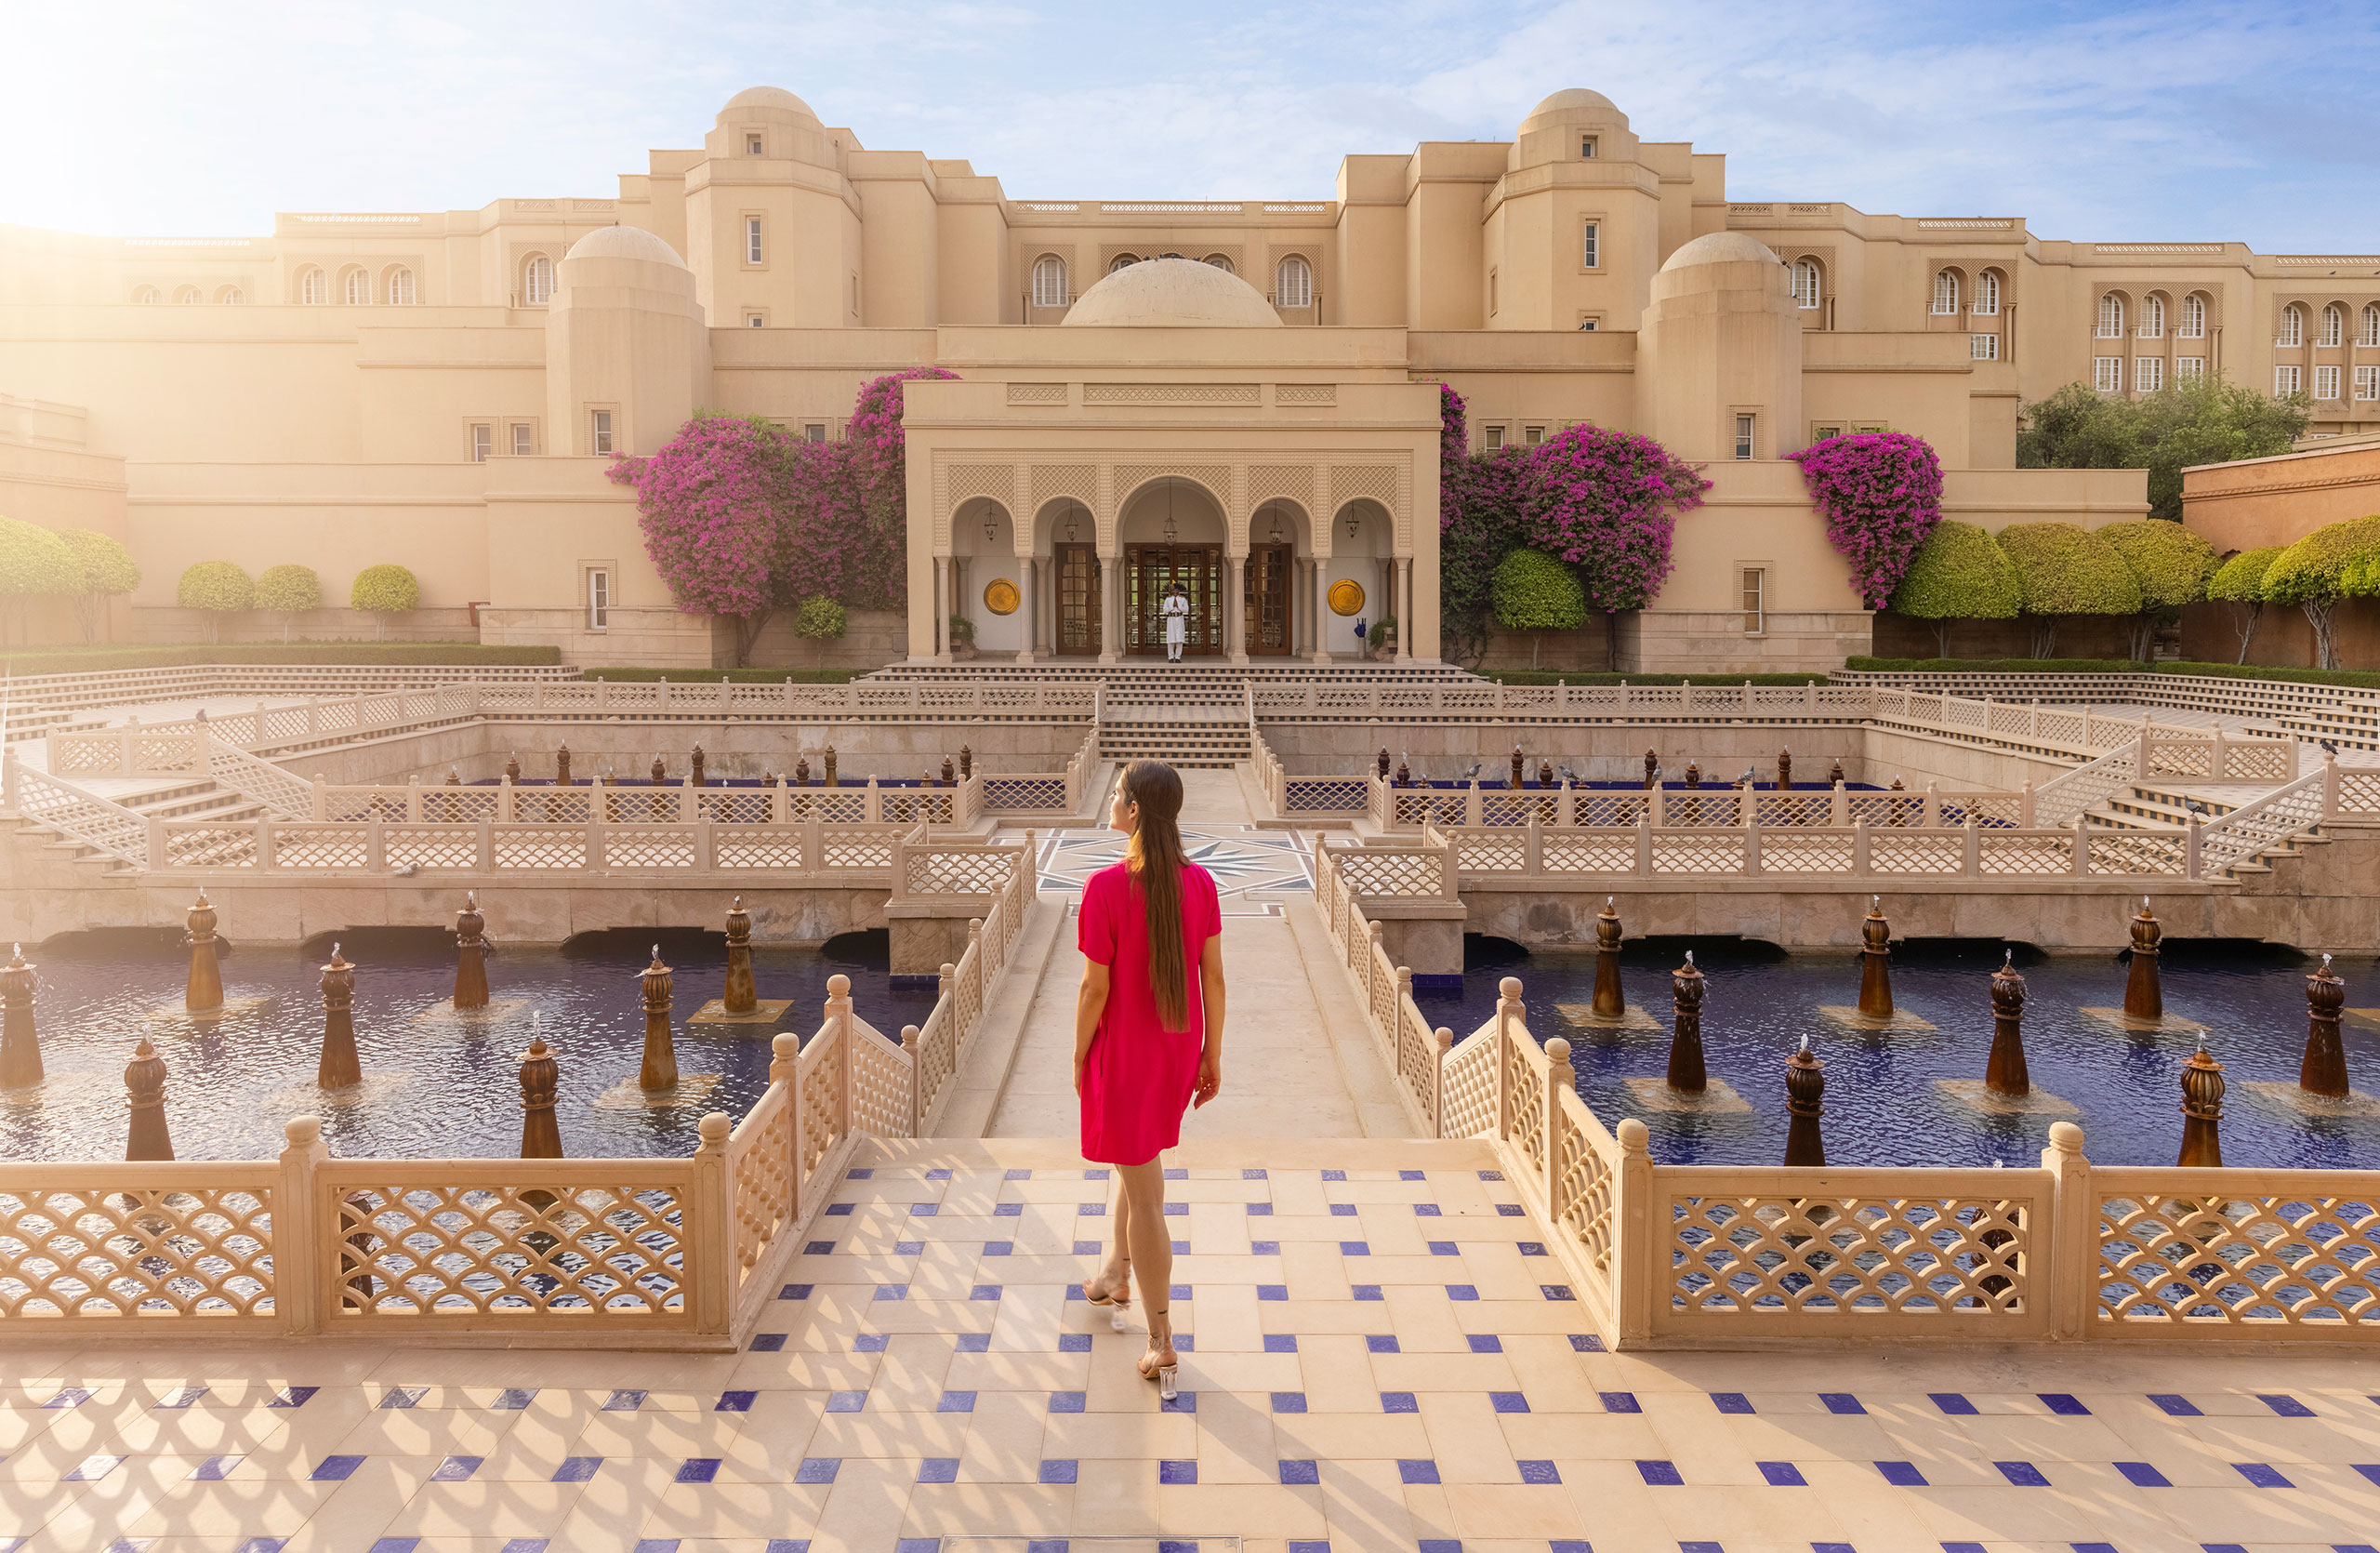 The Oberoi Amarvilas. Photography © The Oberoi Amarvilas.